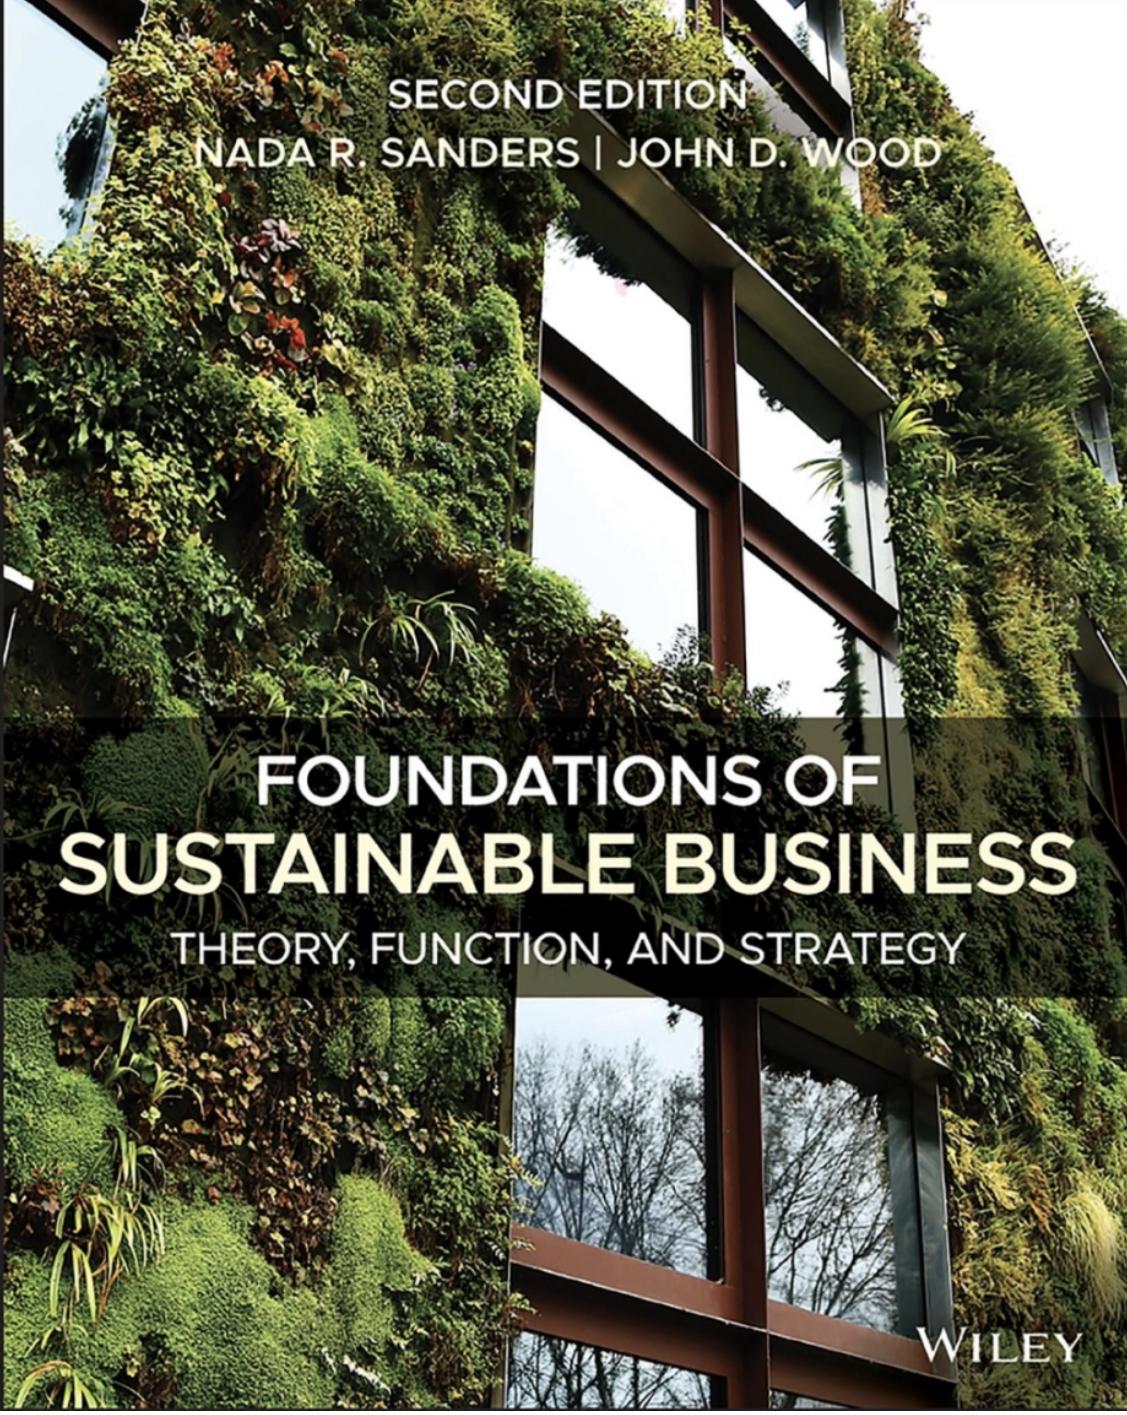 (eBook PDF)Foundations of Sustainable Business: Theory, Function, and Strategy, 2nd Edition by Nada R. Sanders,John D. Wood